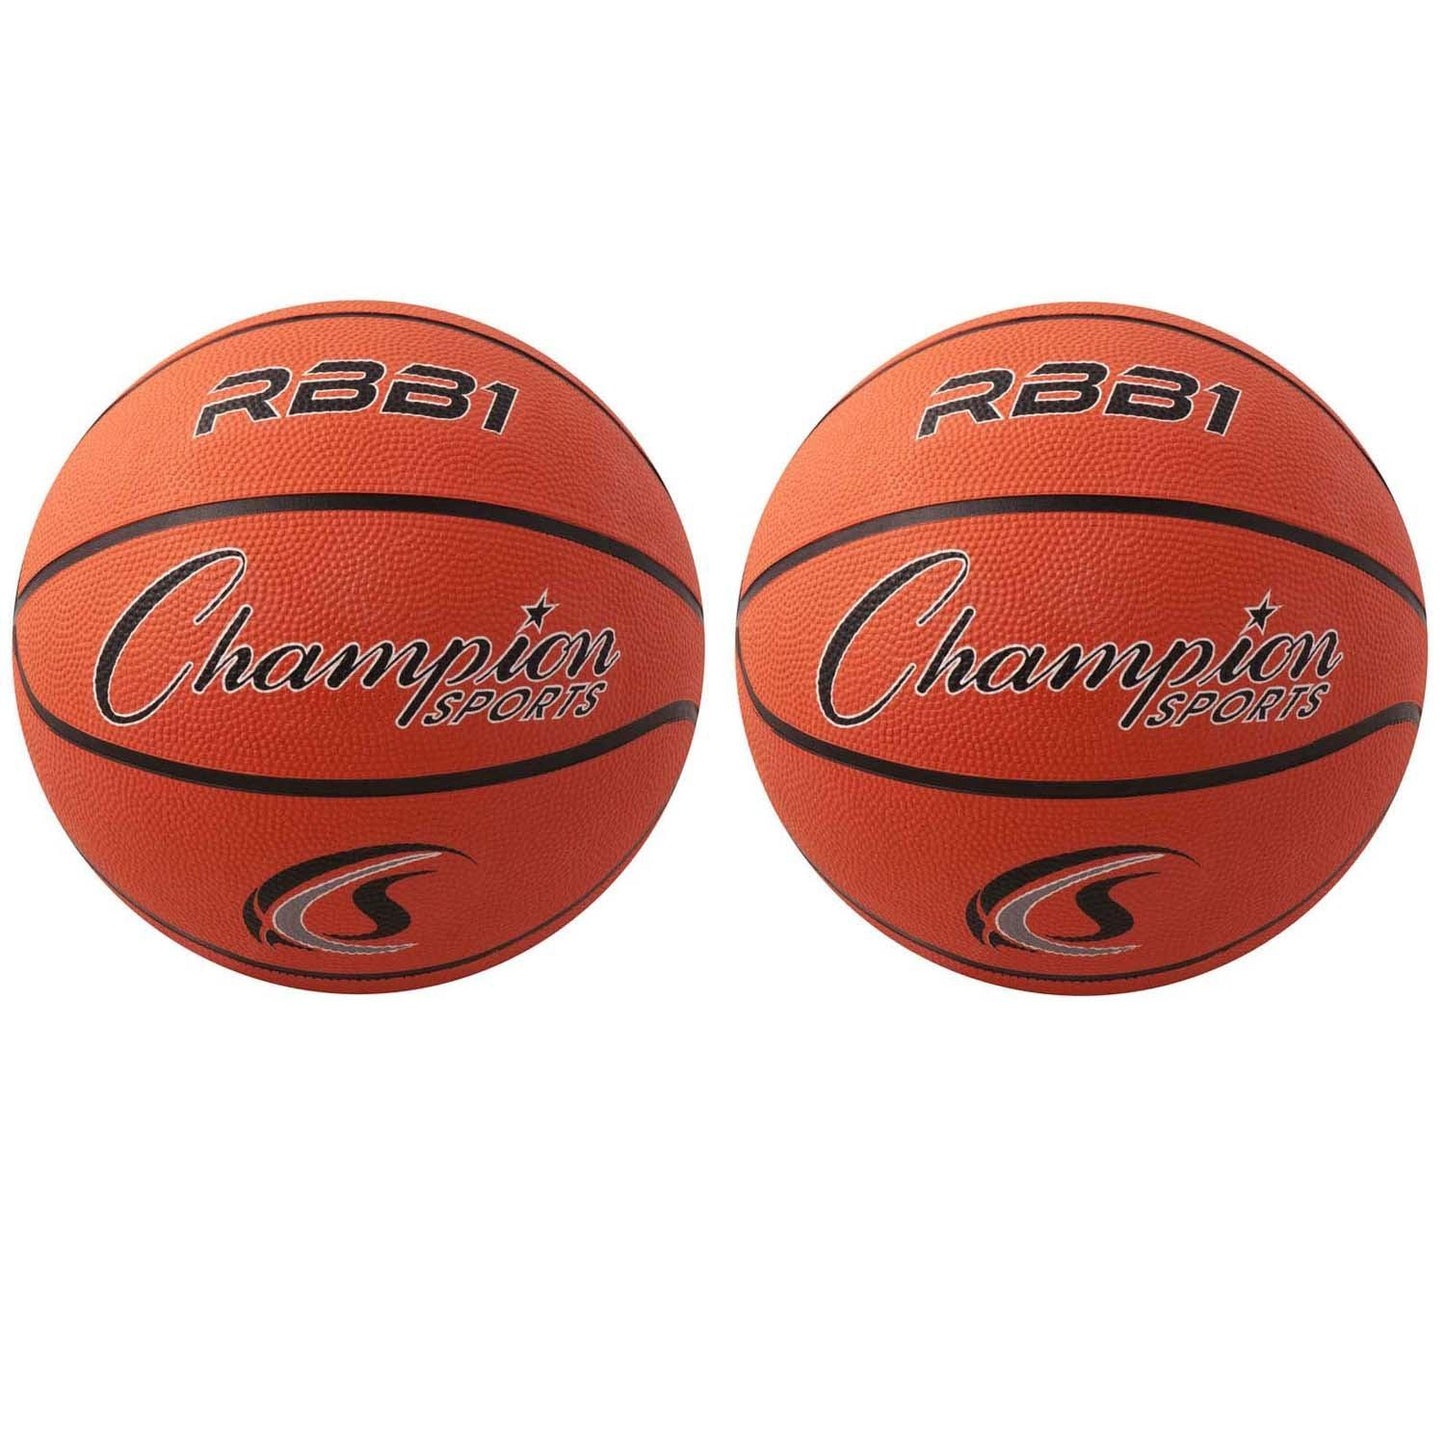 Offical Size Rubber Basketball, Orange, Pack of 2 - Loomini